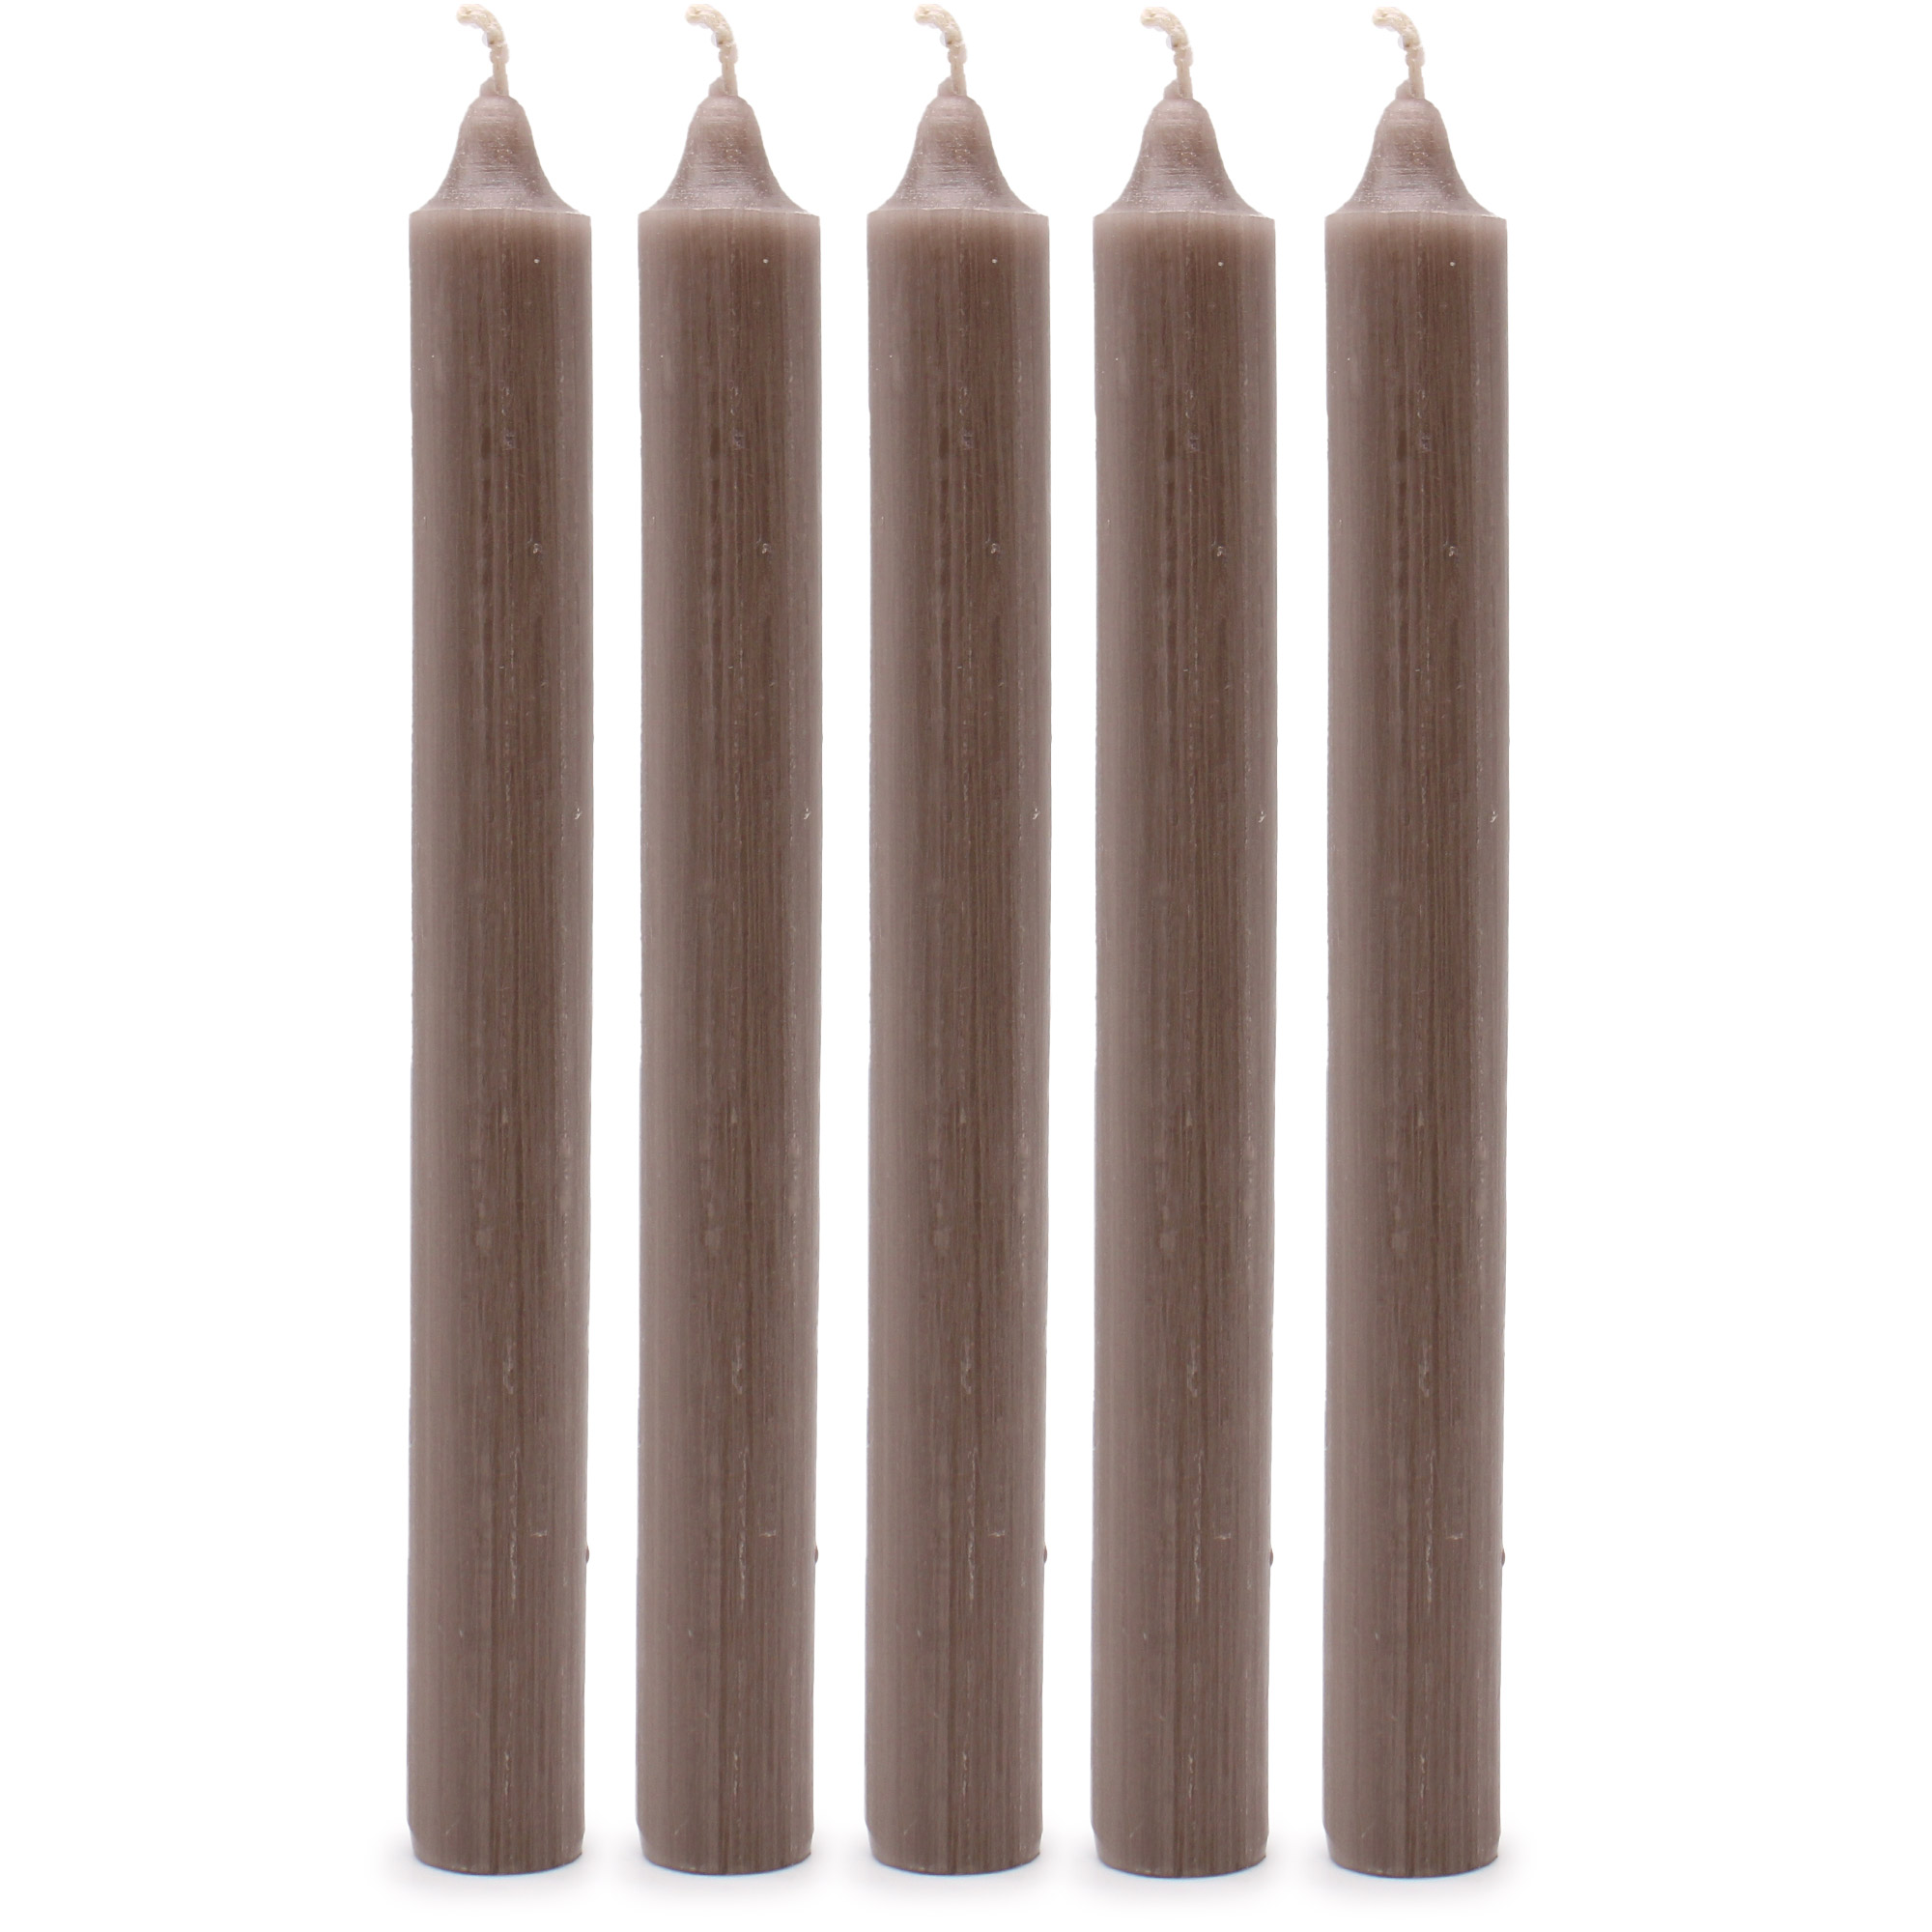 Solid Colour Dinner Candles - Rustic Taupe - Pack of 5